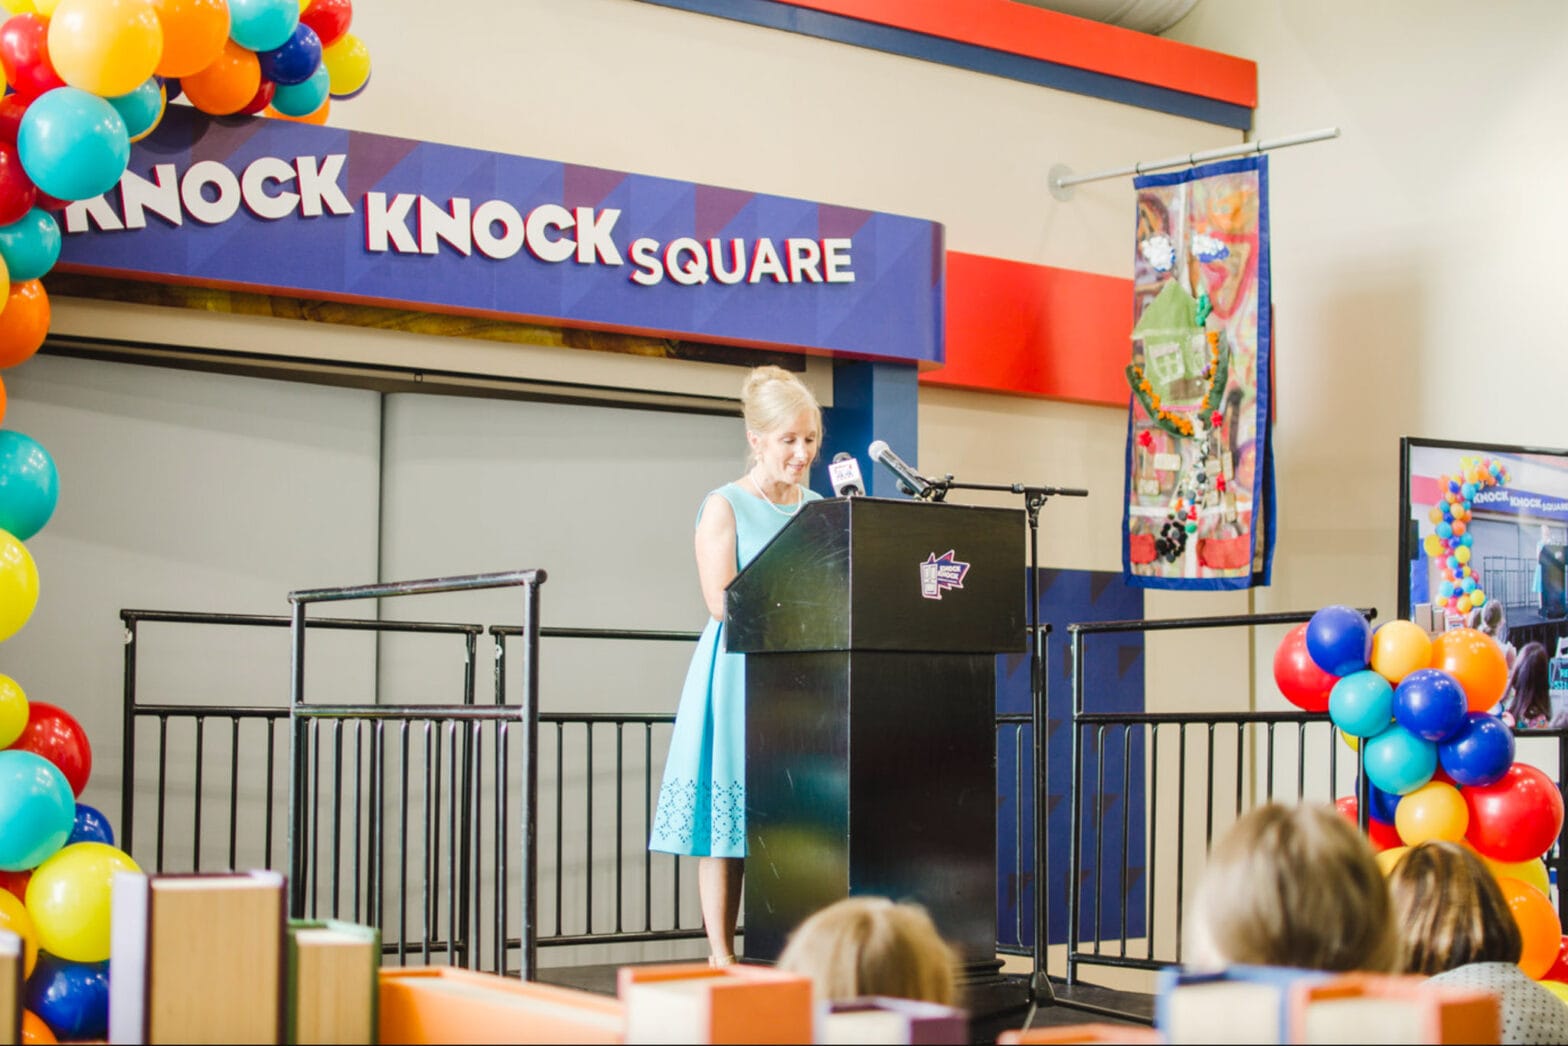 A woman speaking at a podium in Knock Knock Square